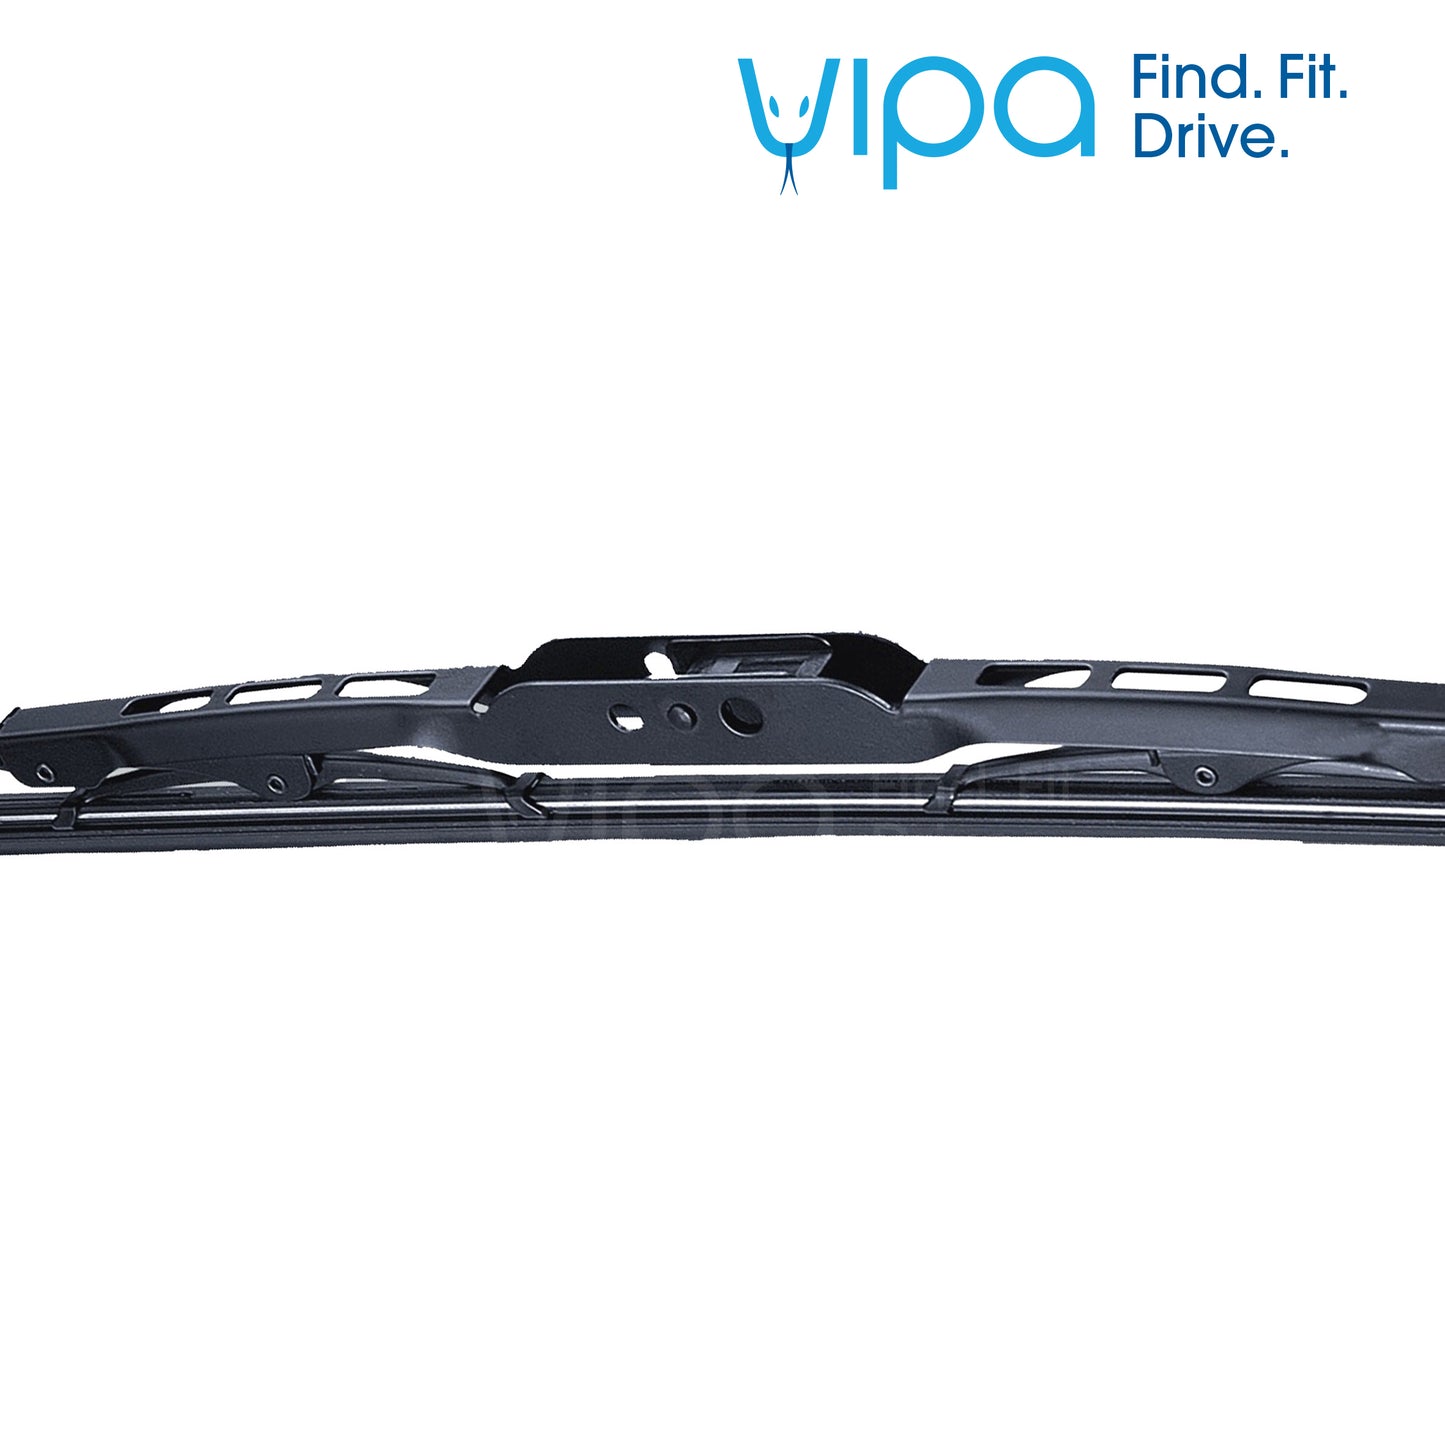 VAUXHALL ASTRA G MK4 Saloon Feb 1998 to May 2005 Wiper Blade Kit